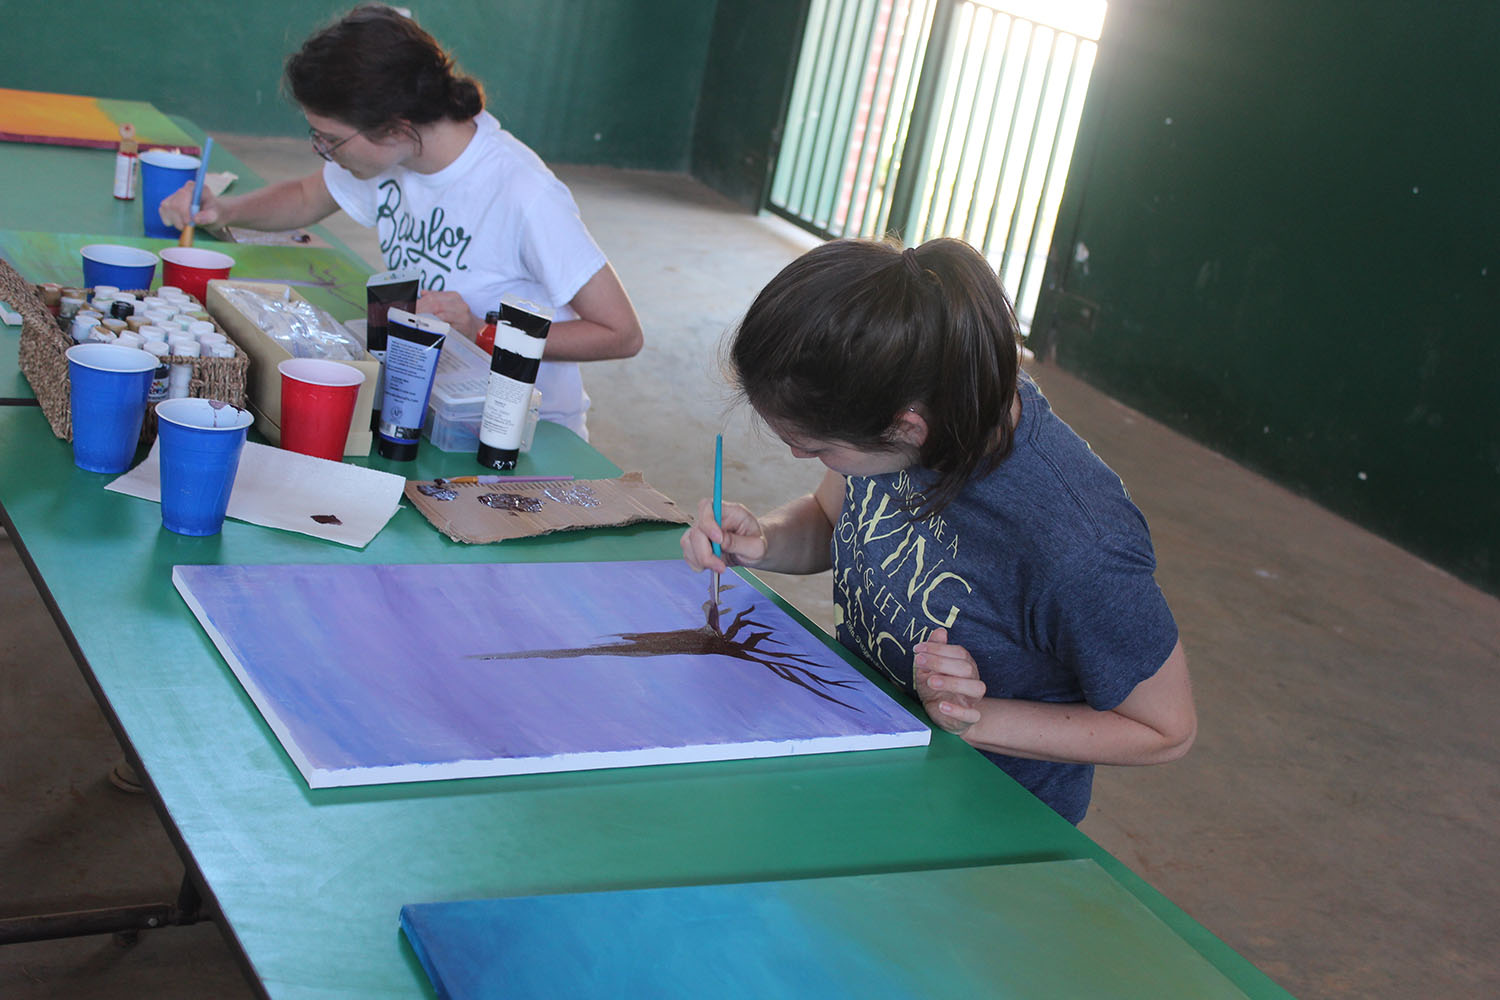 Baylor students Veronica Campbell (front) and Rachel Taylor (back) painted abstract backgrounds and trees on canvases to raise funds for the Family Legacy Tree of Life Children's Village in Zambia. (Photo/Baylor University) 